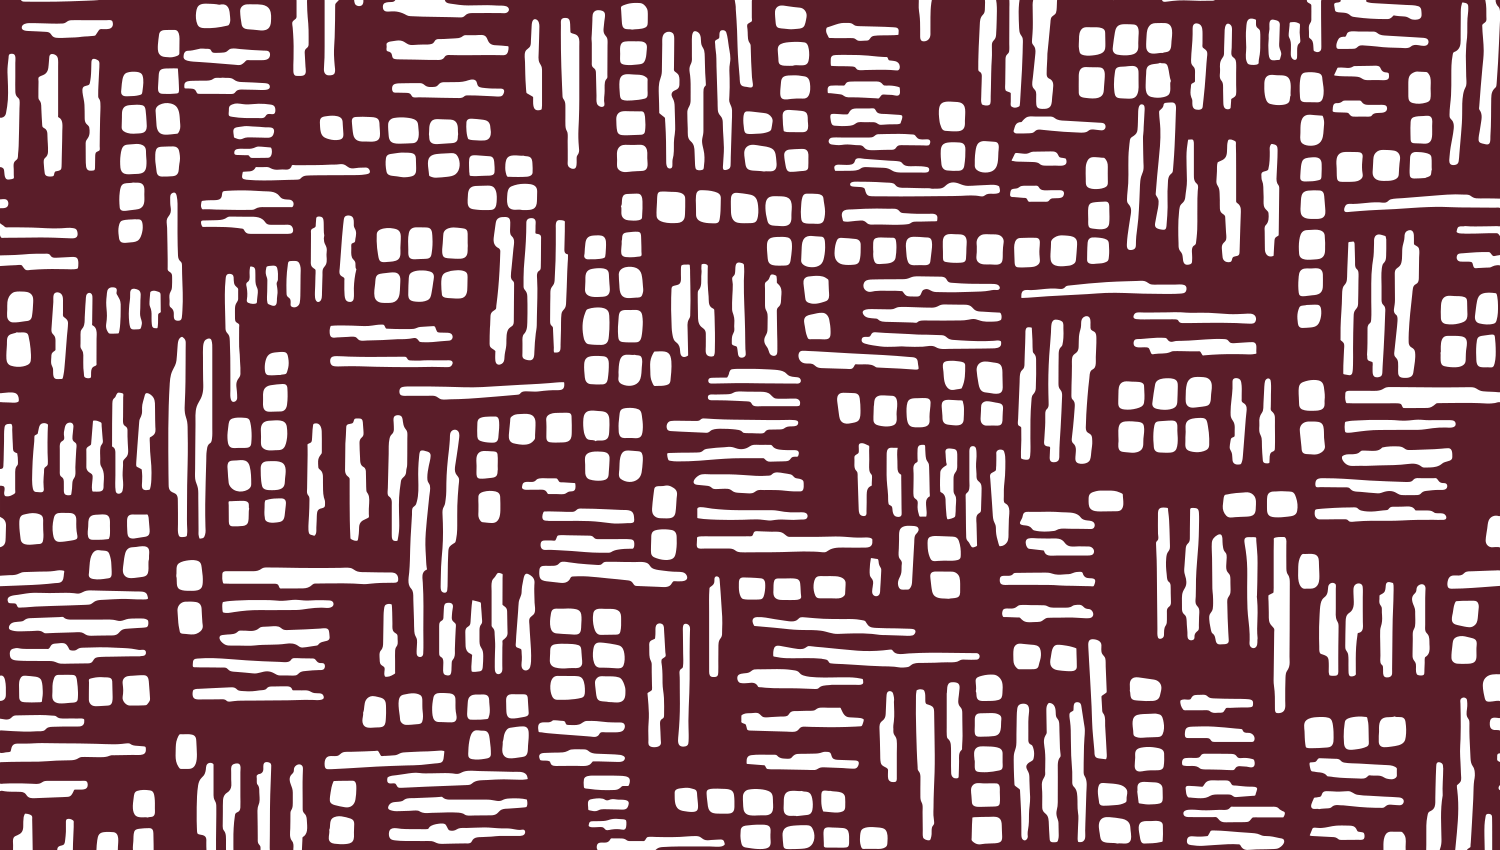 Parasoleil™ Krung Thep© pattern displayed with a burgundy color overlay